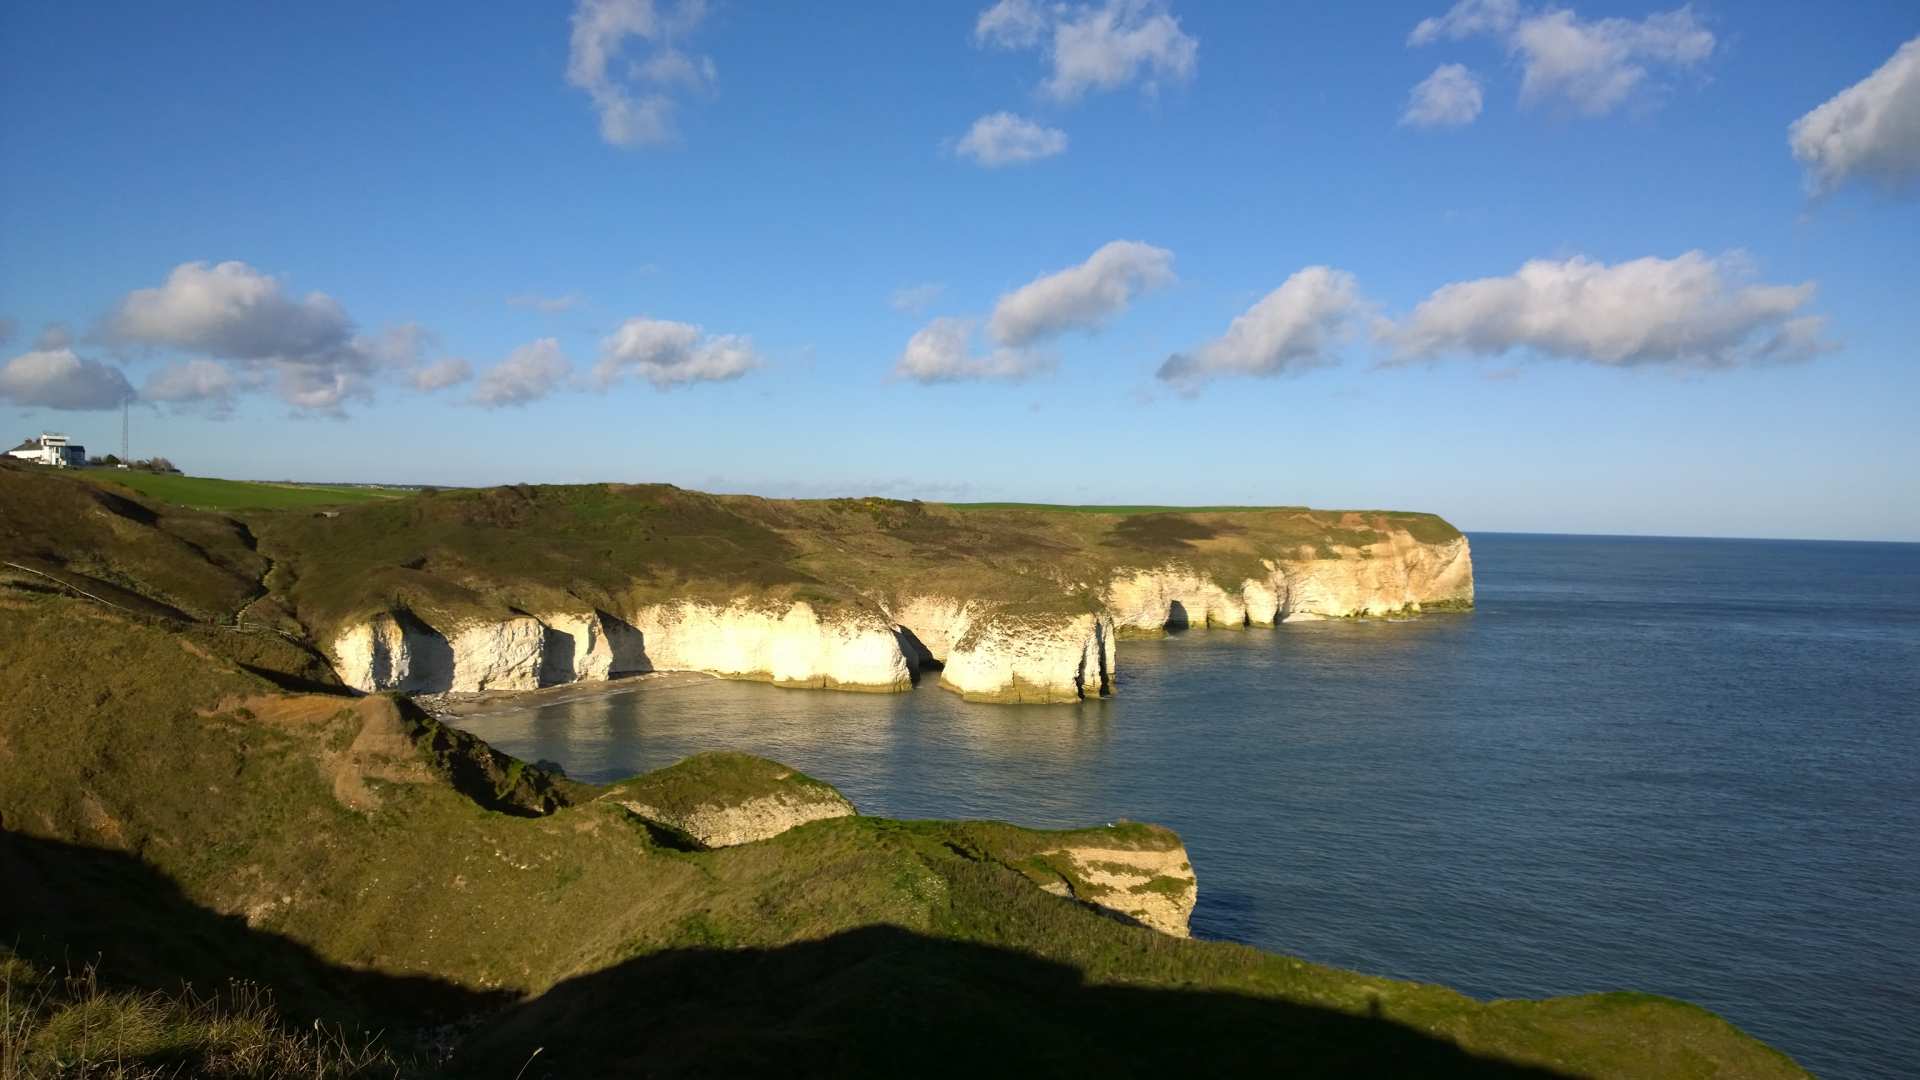 The chalky cliffs at Flamborough Head. - The chalky cliffs at Flamborough Head.